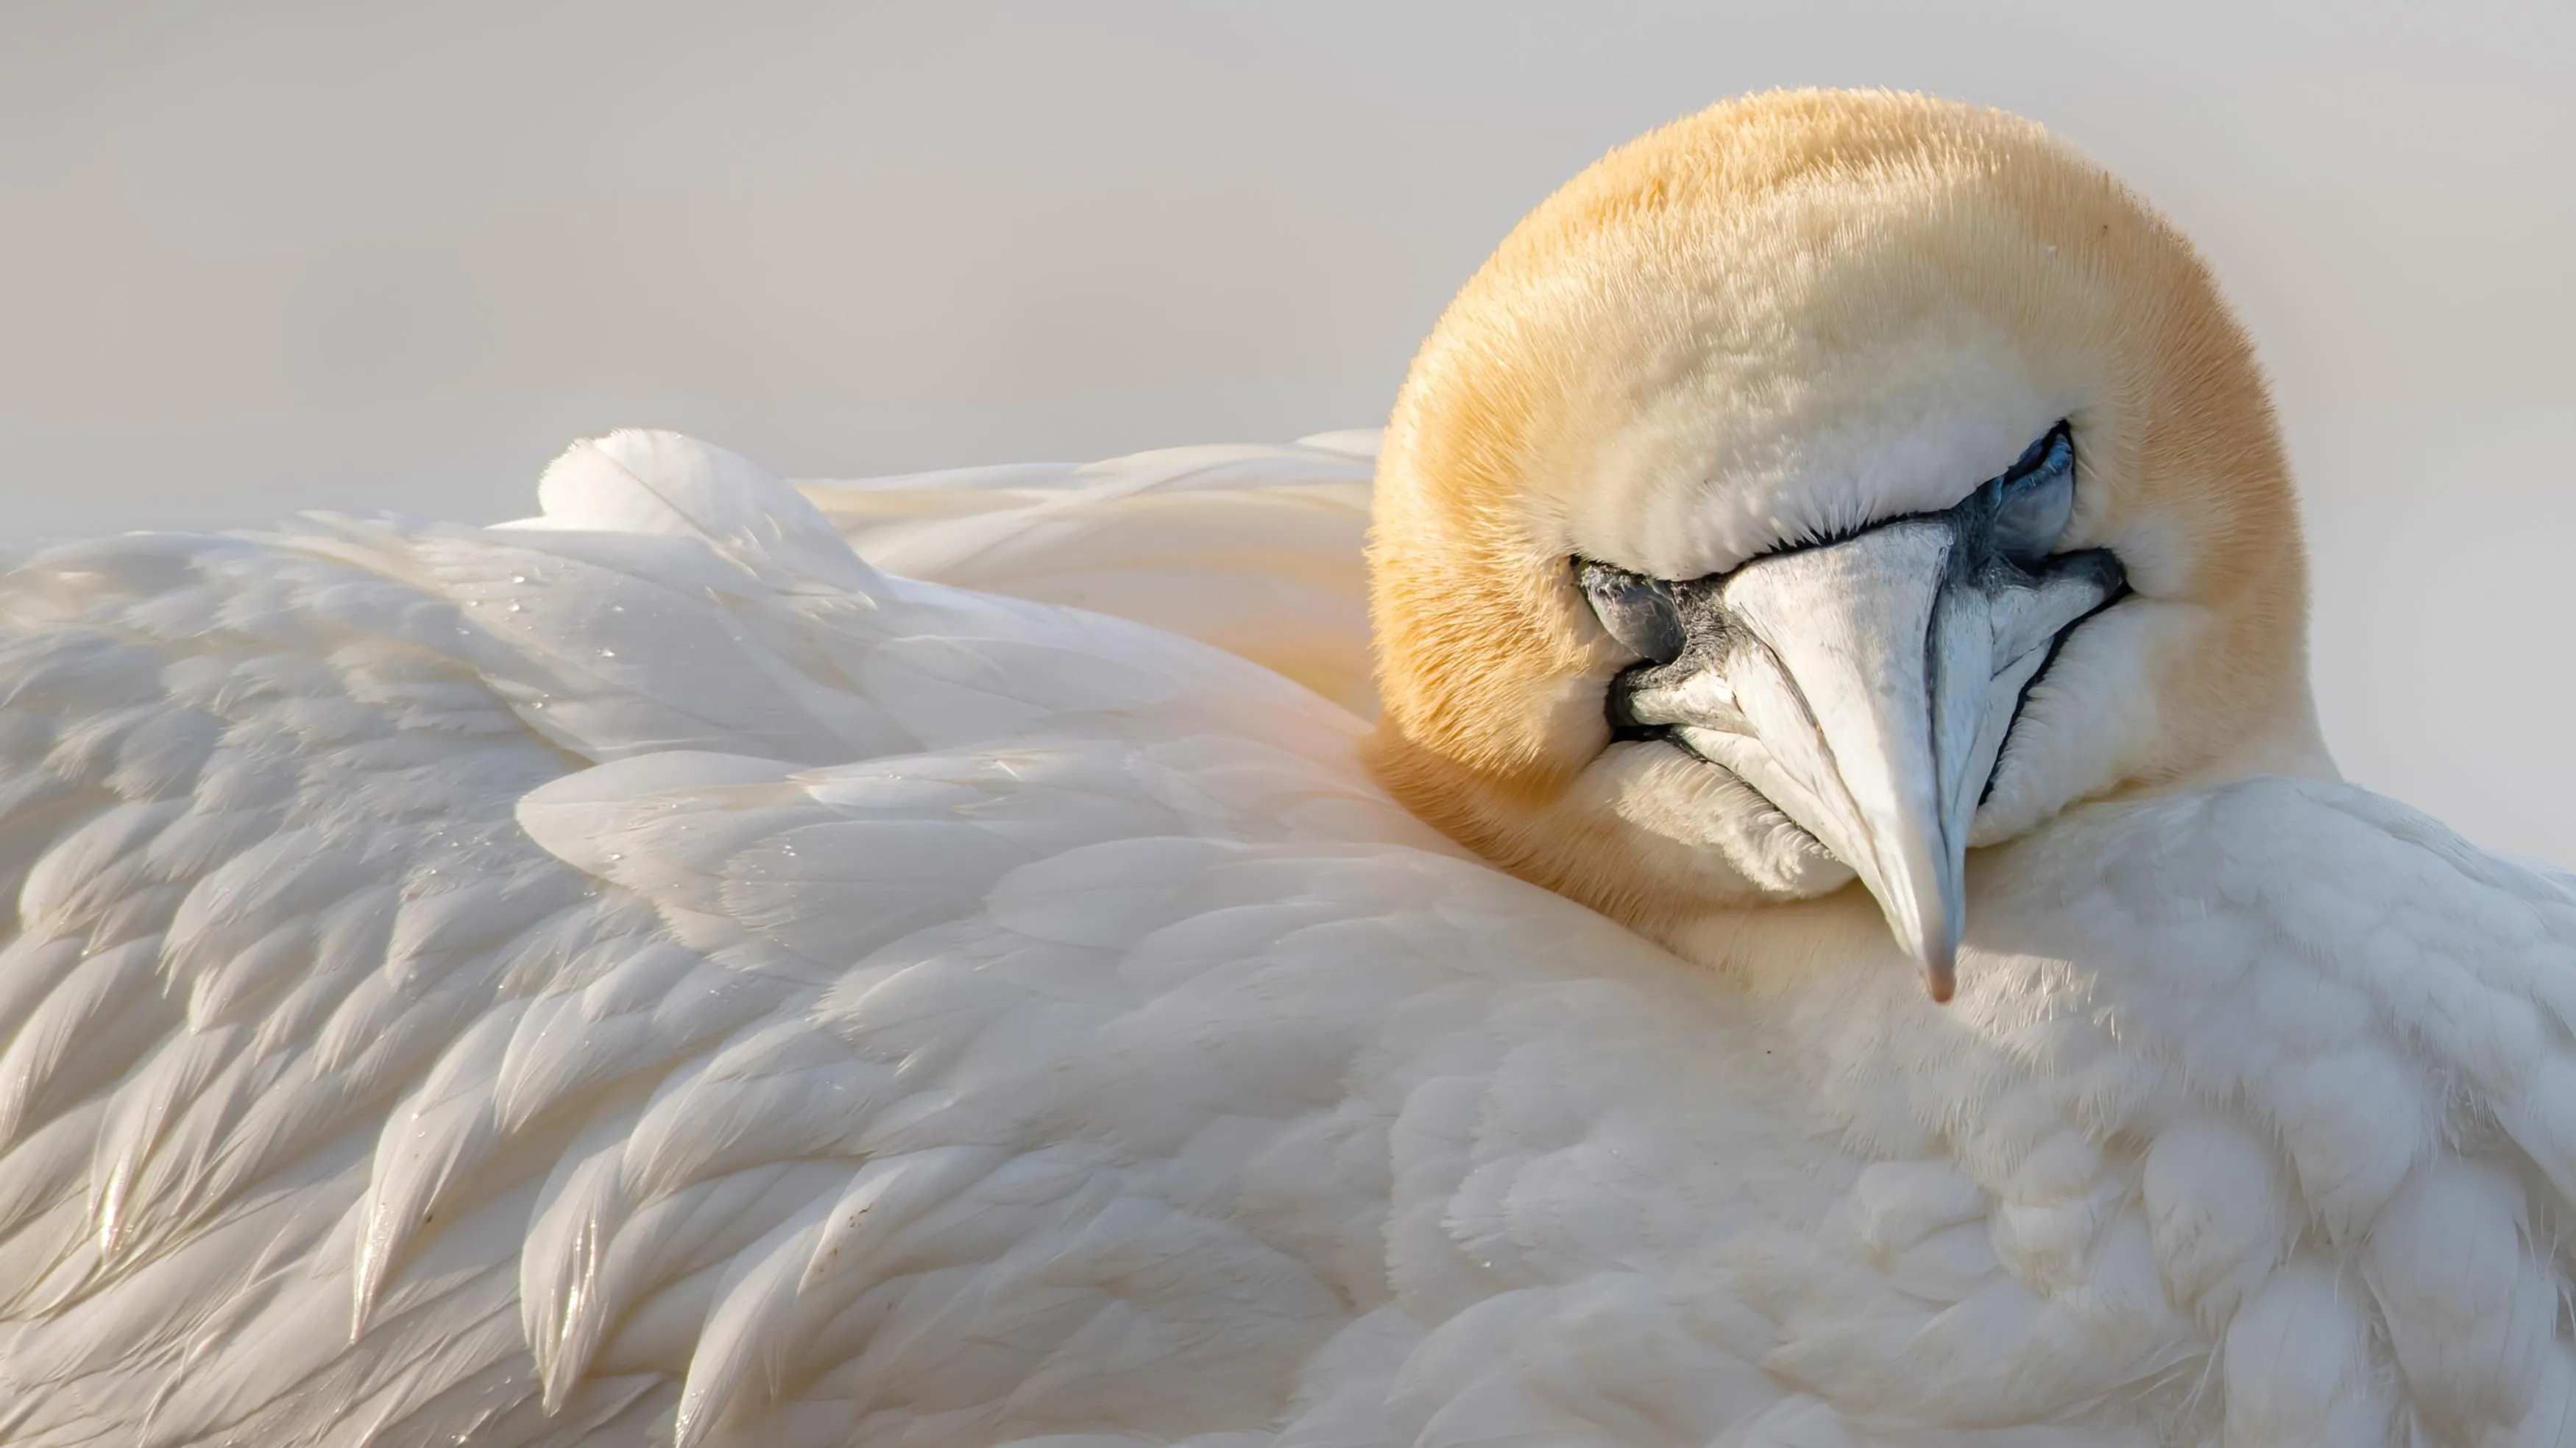 A Gannet, laying down with its eyes closed.